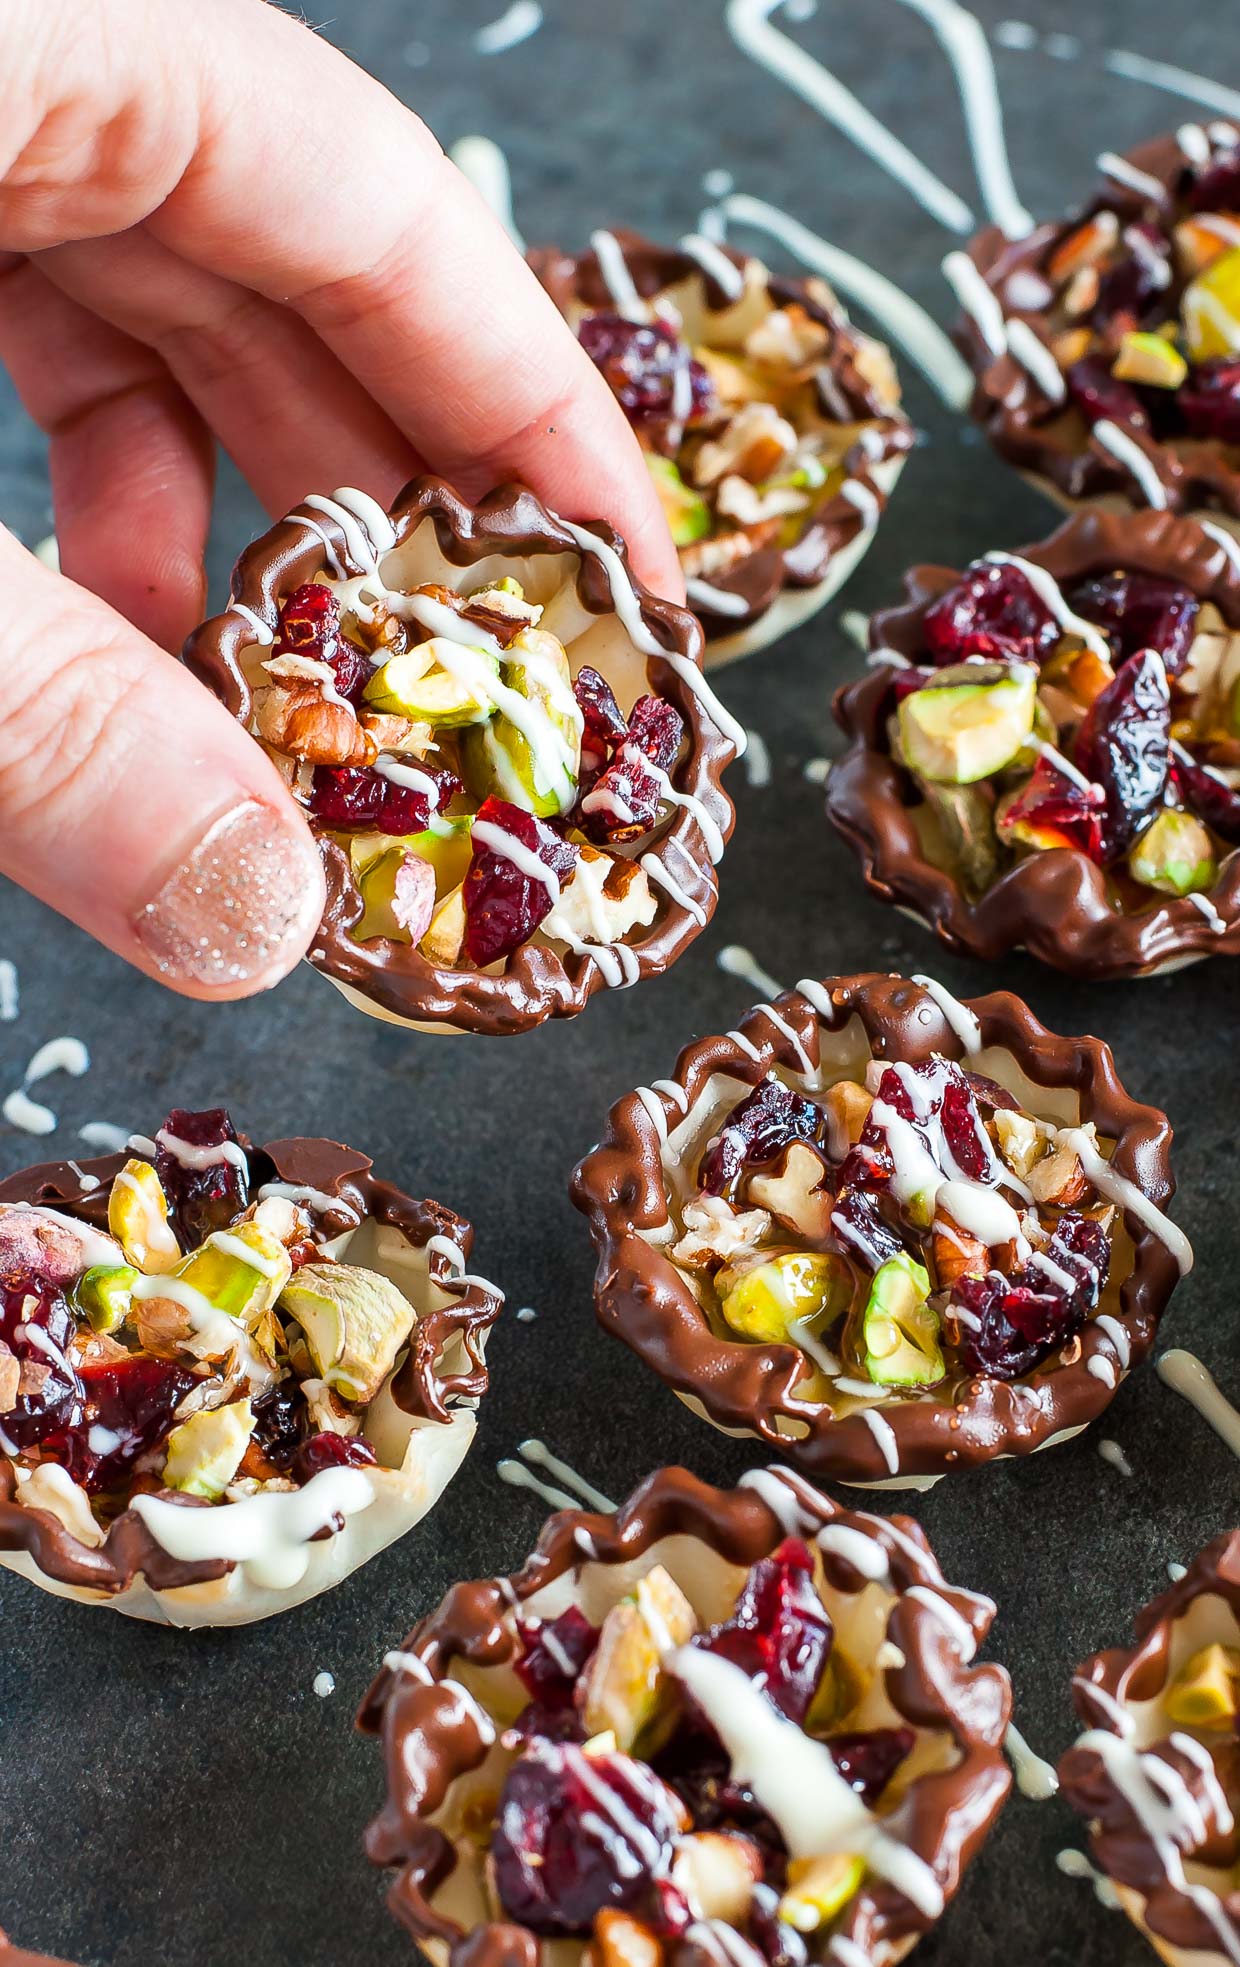 Dipped and drizzled in chocolate, these Cranberry Bliss Baklava Bites are easy to make and even easier to devour! This pint-sized no-bake phyllo cups are perfect for the holidays!